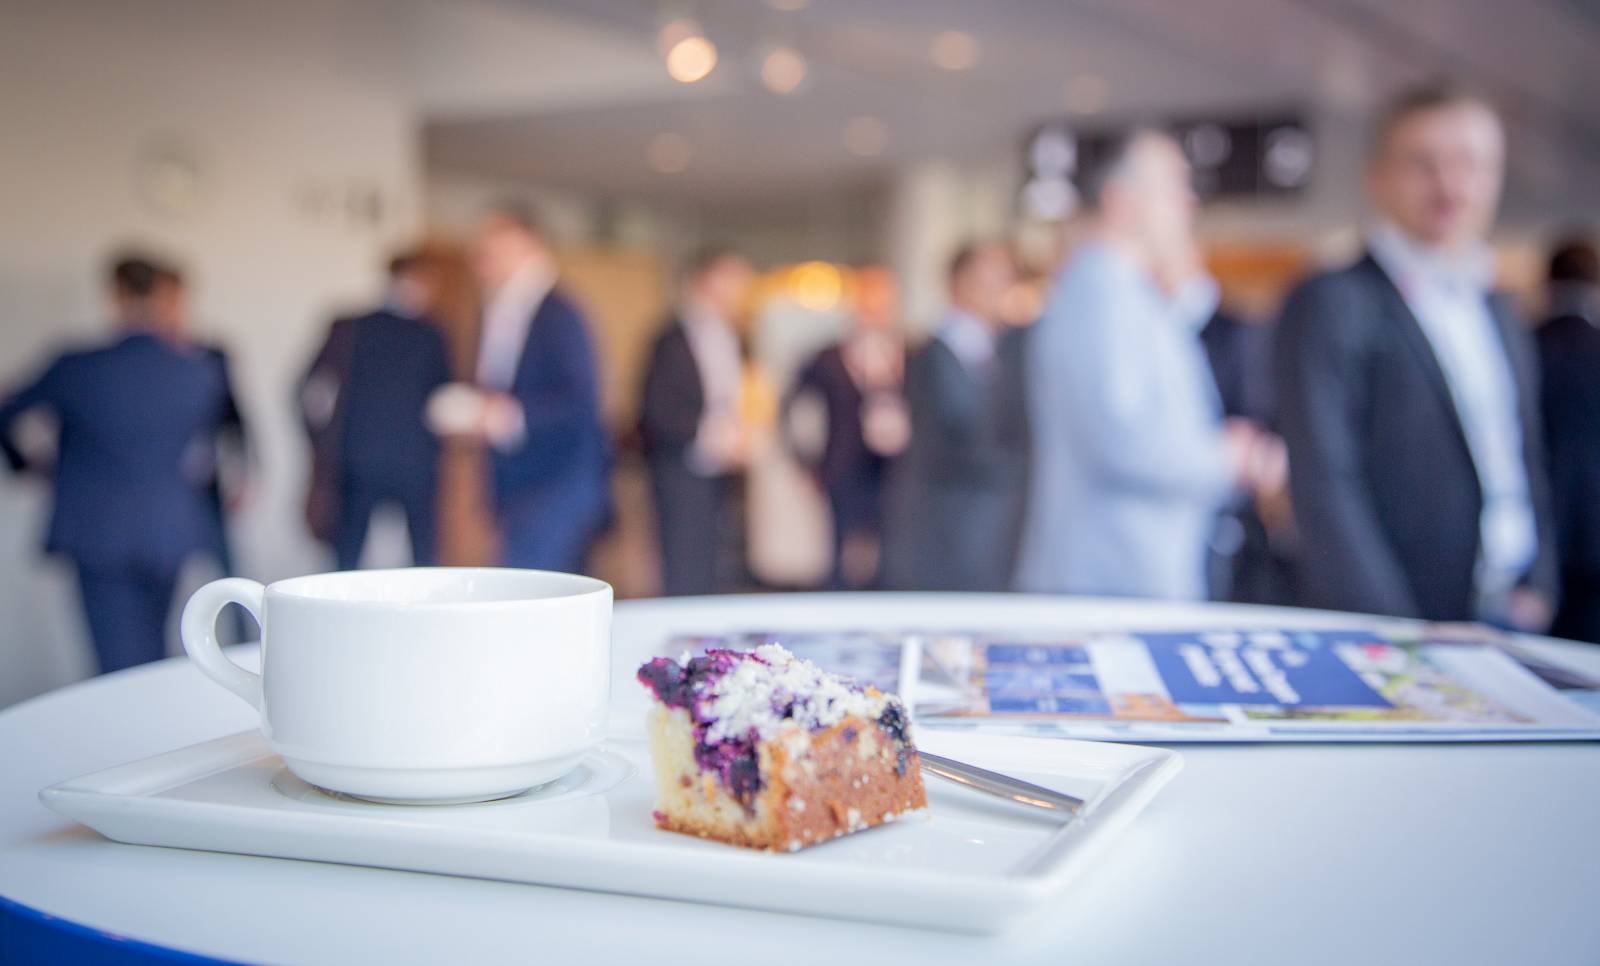 A cup of coffee and a piece of blueberry pie on a table, with conference participants in the background